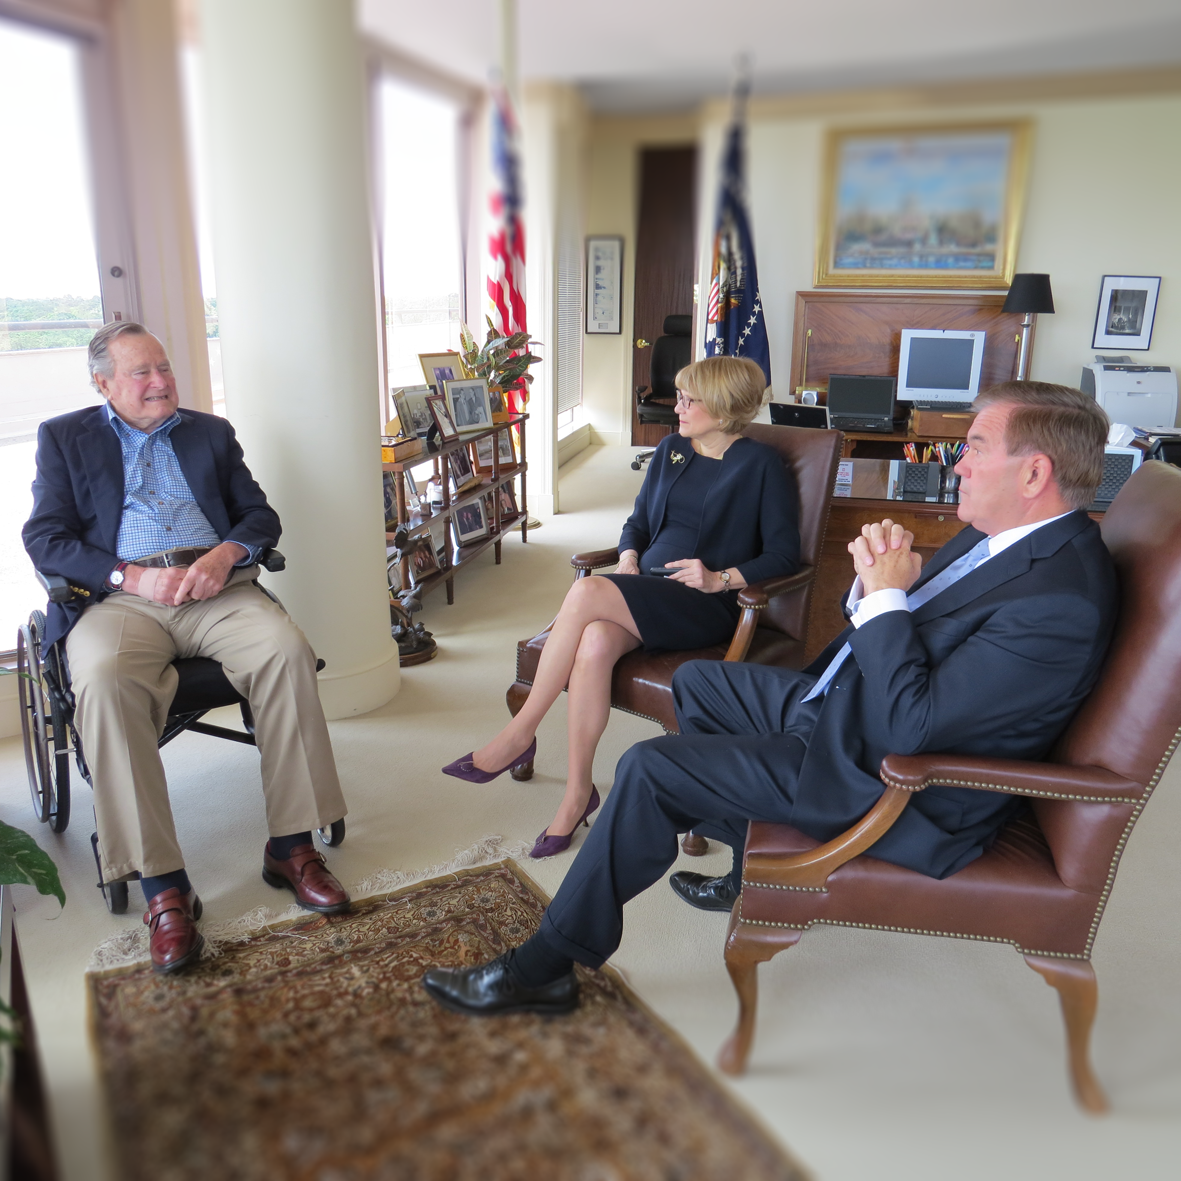 Seated from left to right: President George H. W. Bush, Carol Glazer, and Governor Tom Ridge.